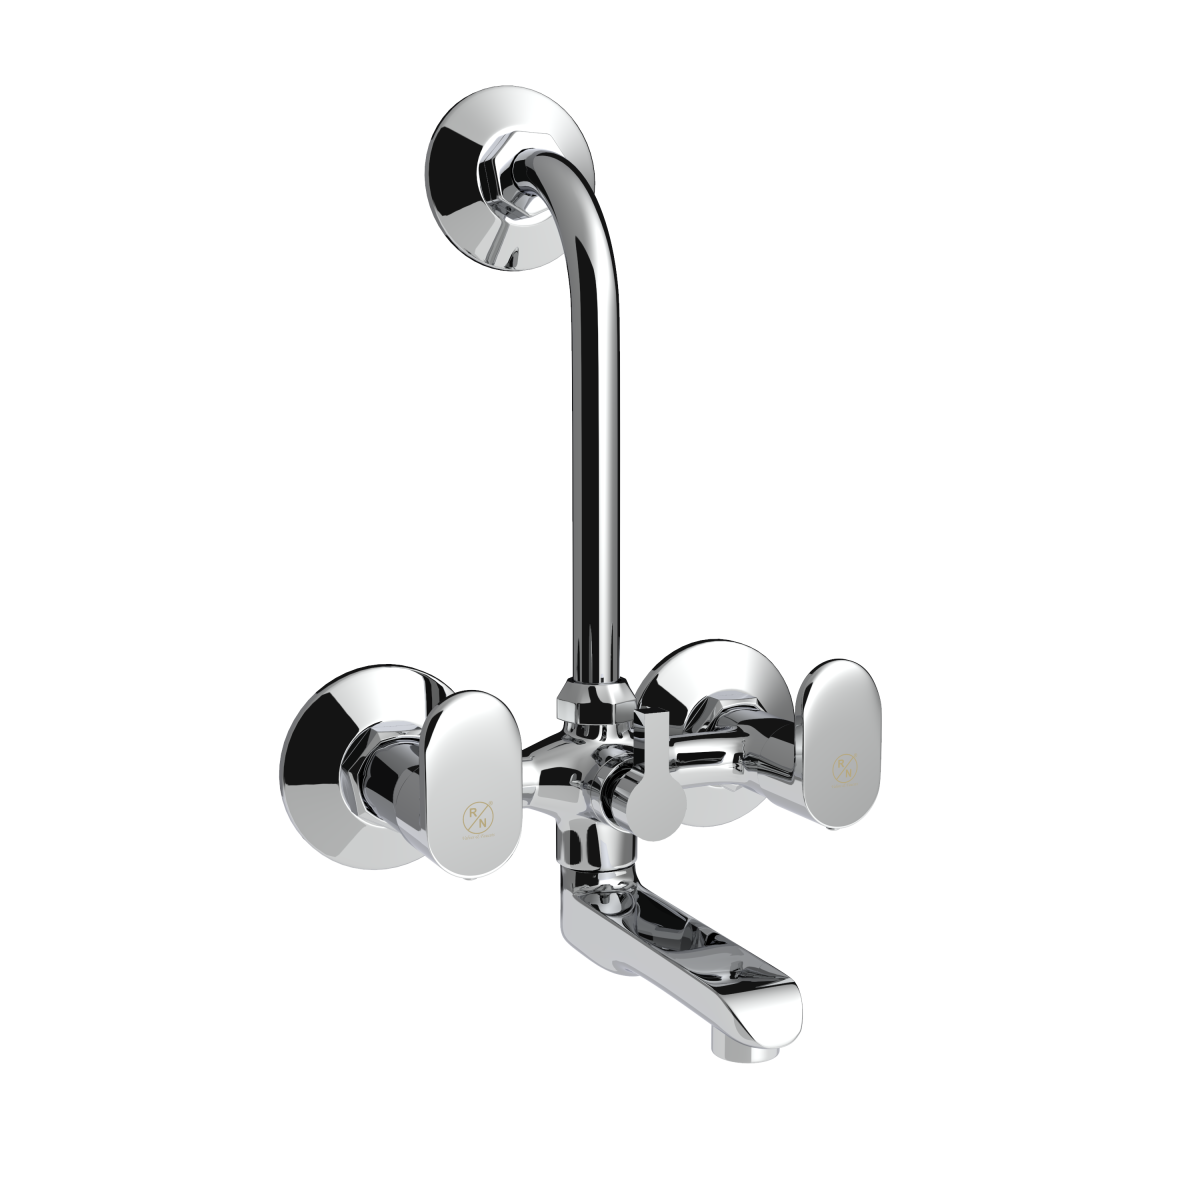 Wall Mixer Telephonic With L Bend / Crutch